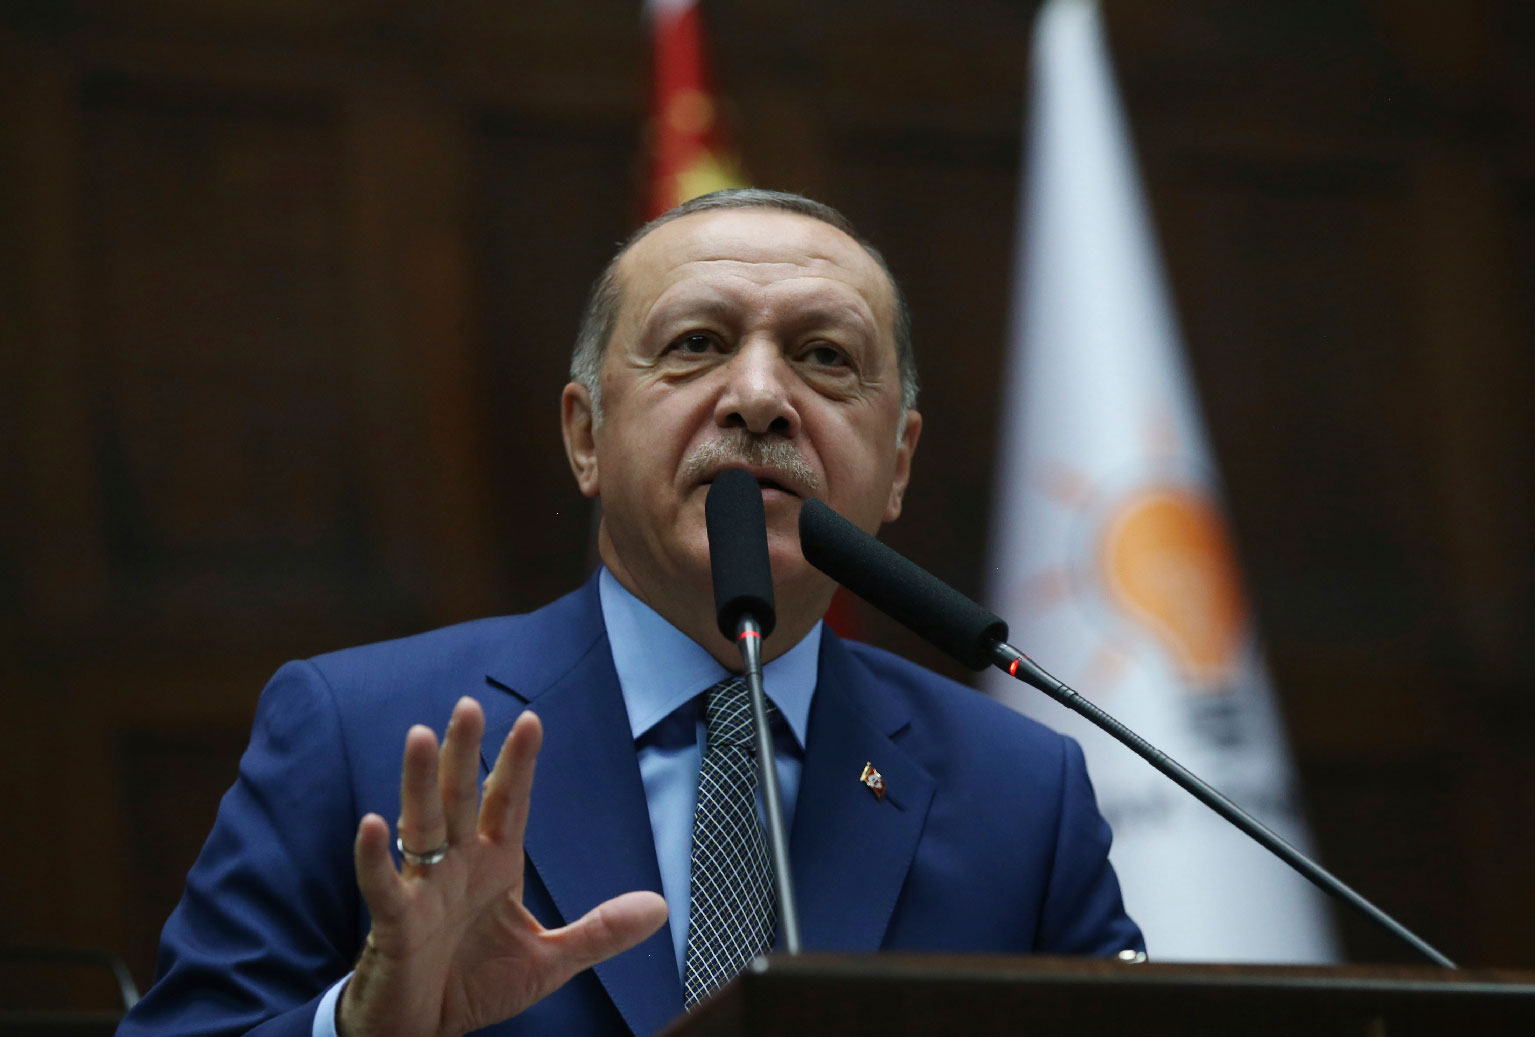 For Erdogan, promoting the Muslim Brotherhood is at the heart of this power struggle.